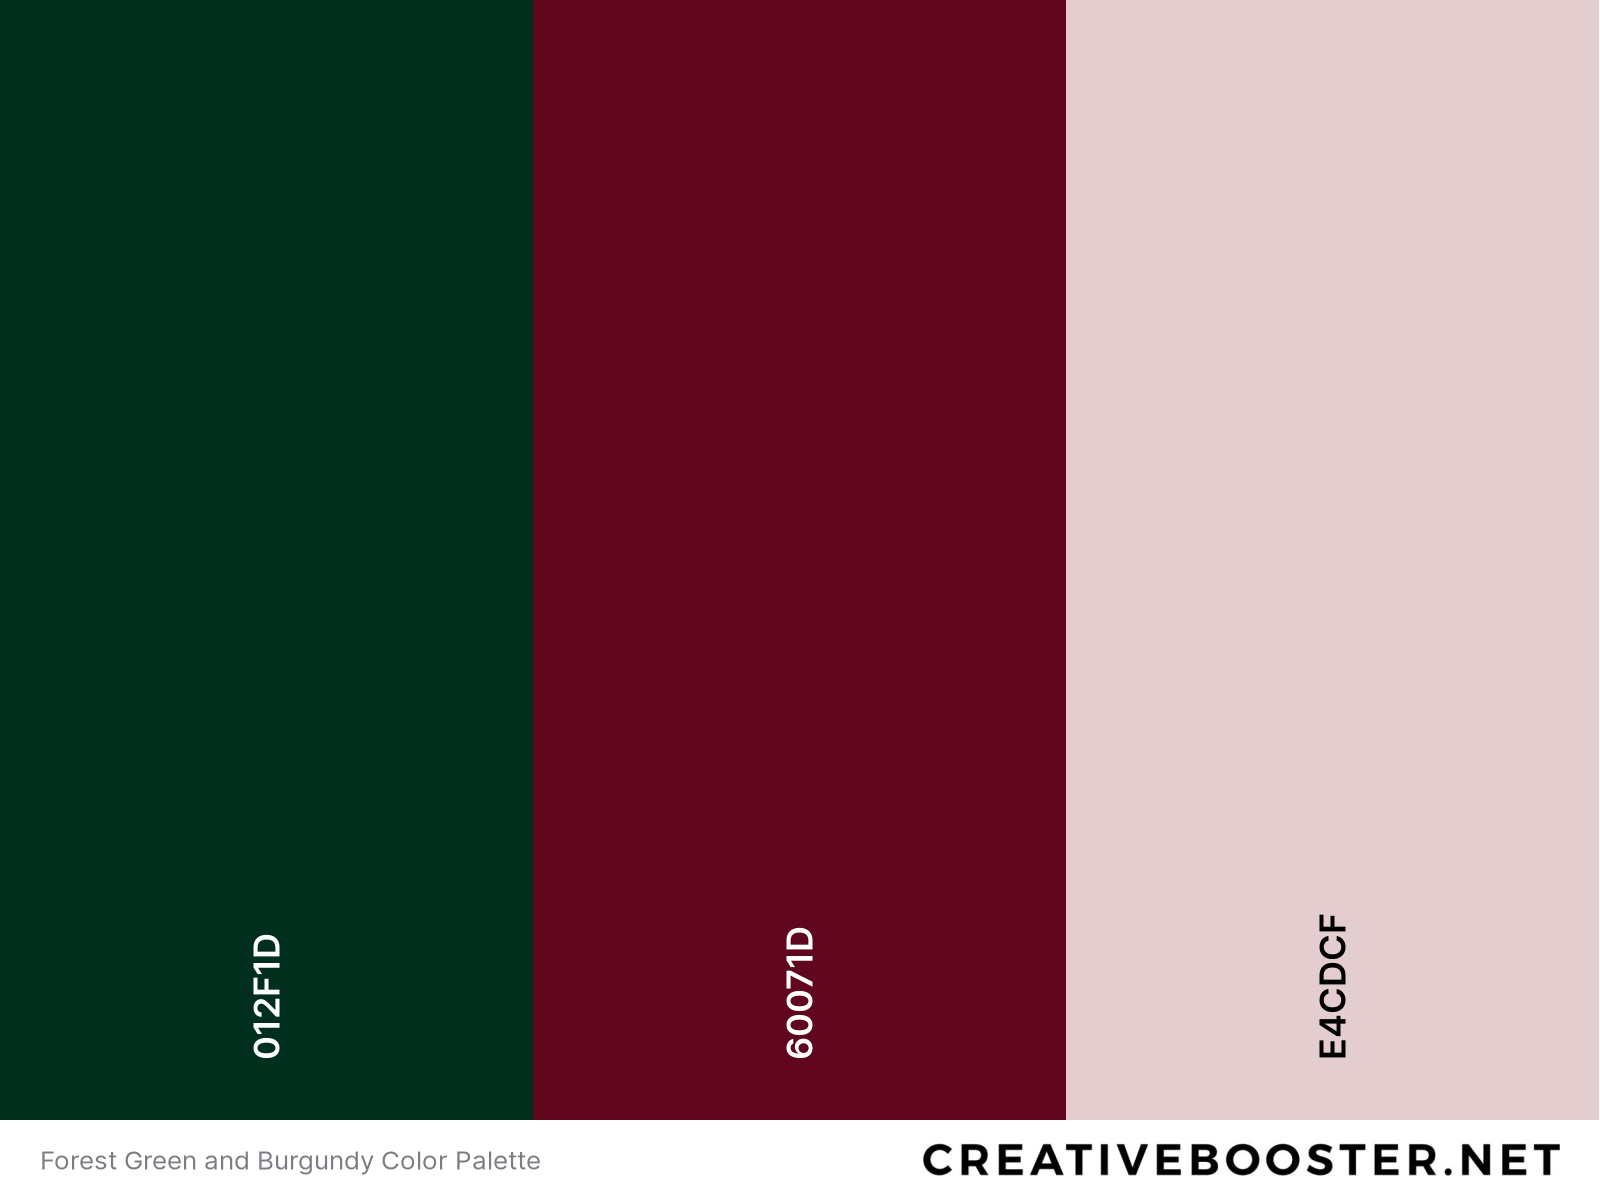 Forest Green and Burgundy Color Palette